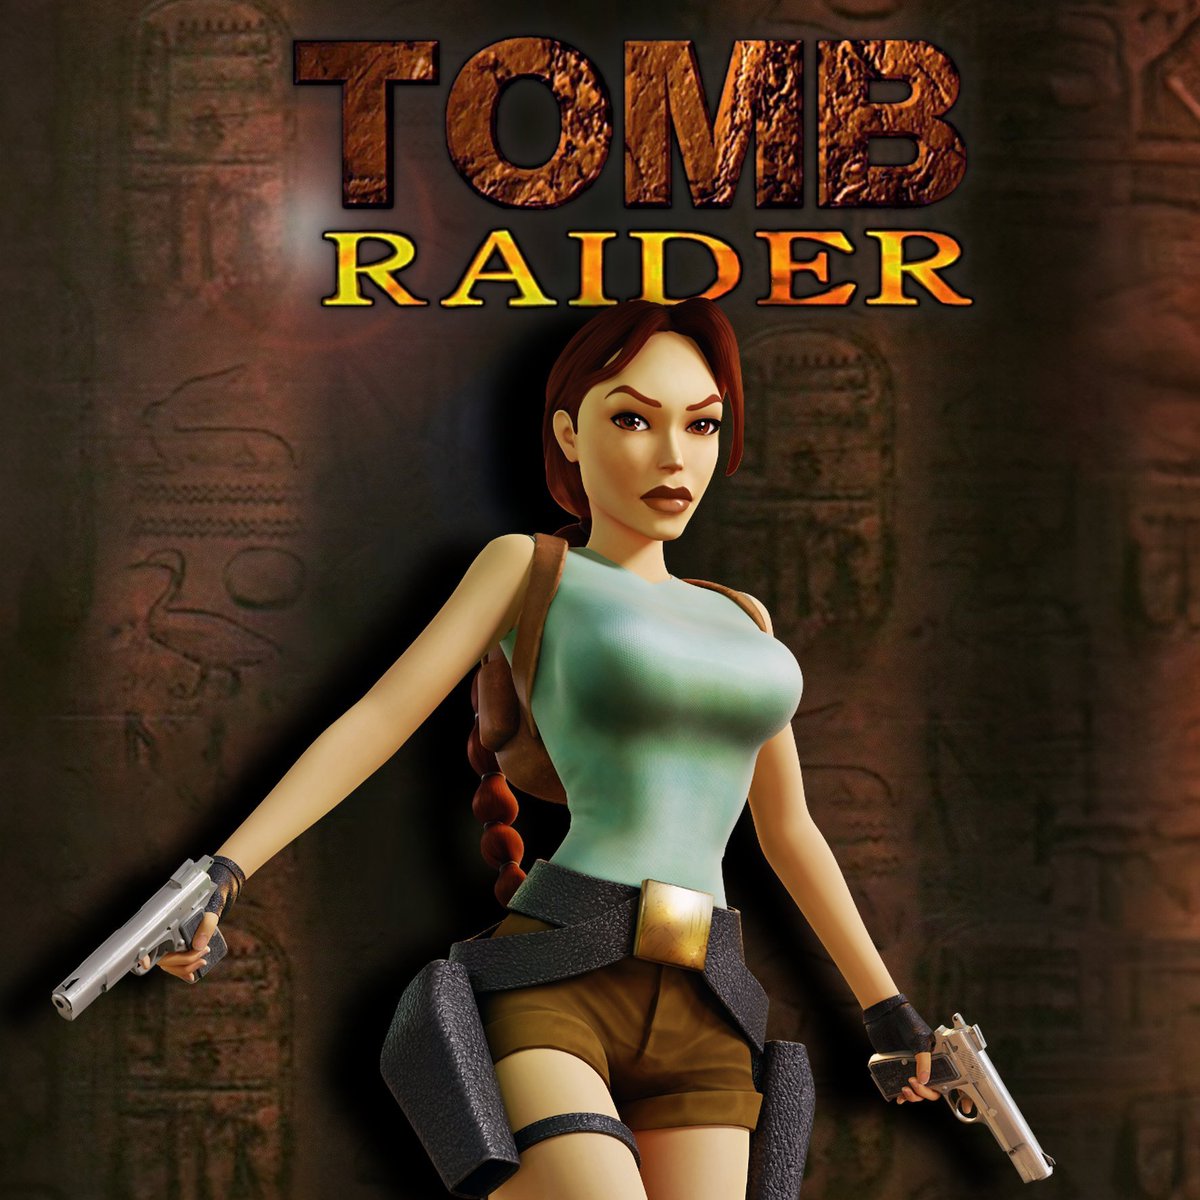 New Game + mode introduced in the #TombRaider Remastered collection is a true endurance test for veterans. No medipacks, all of those are replaced by ammo pickups. Only way to save or restore health is to use the save crystals from the ps1 era. Enemies are also tougher.